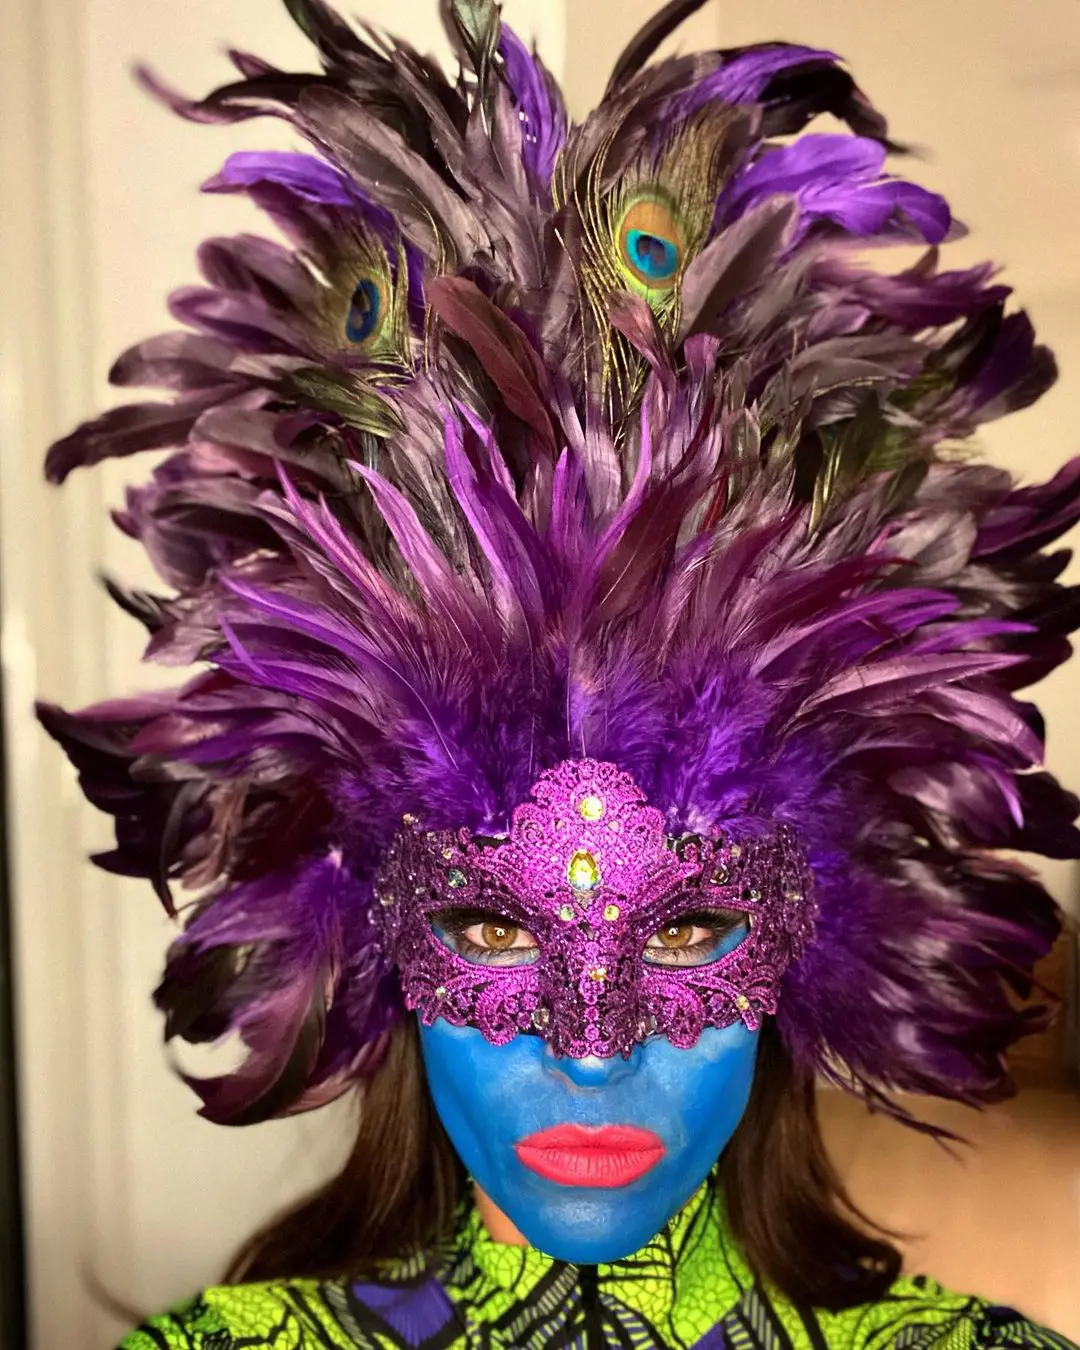 Emily with her face painted as a peacock.